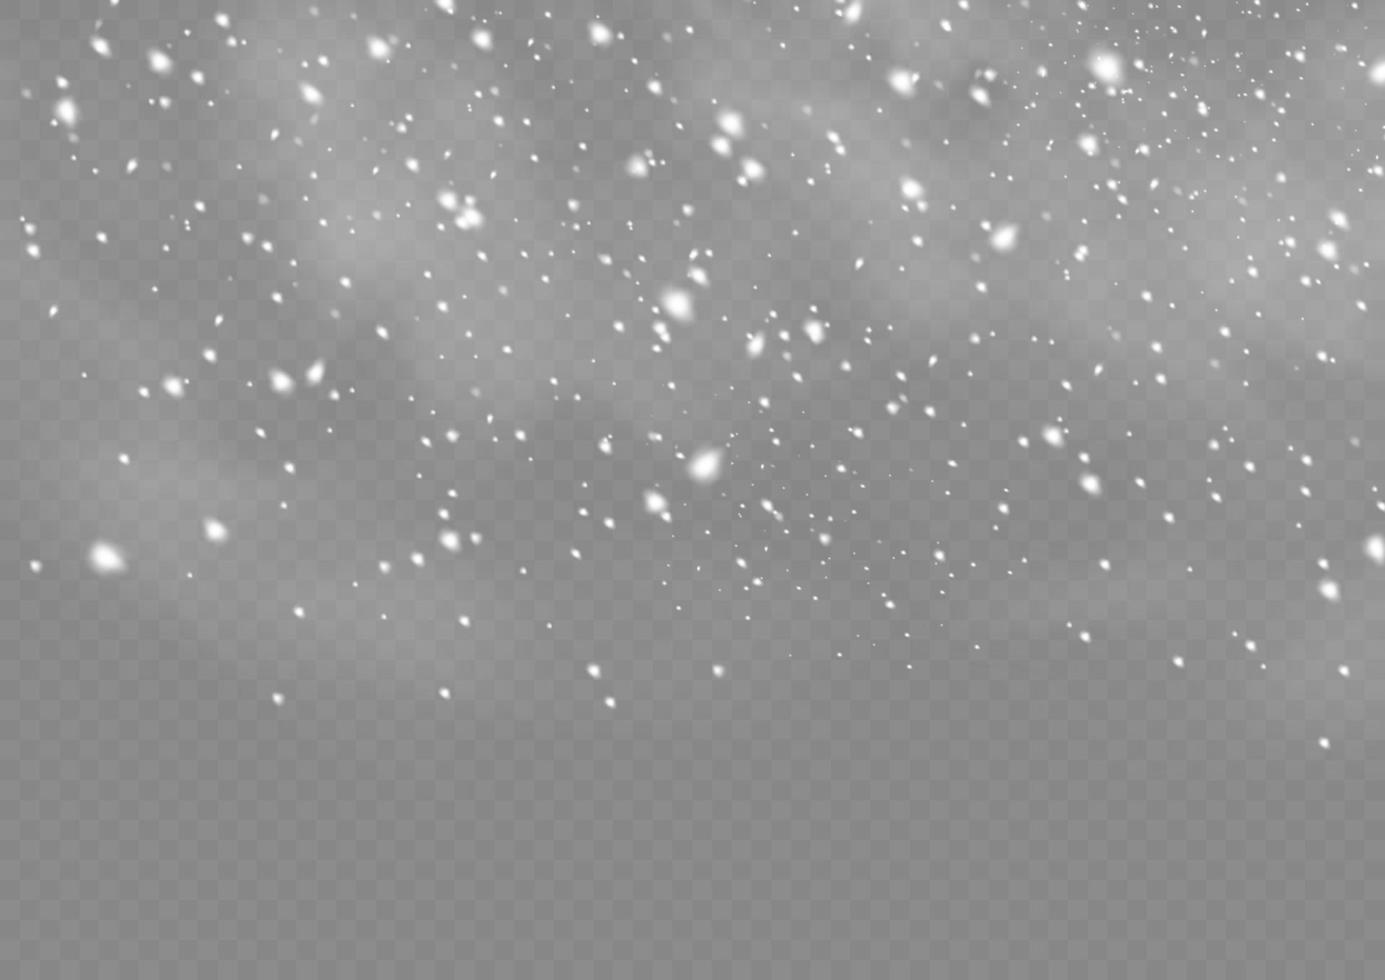 Snow and wind. Vector heavy snowfall, snowflakes in various shapes and forms. Many white cold flakes elements. White snowflakes are flying in the air. snow background.